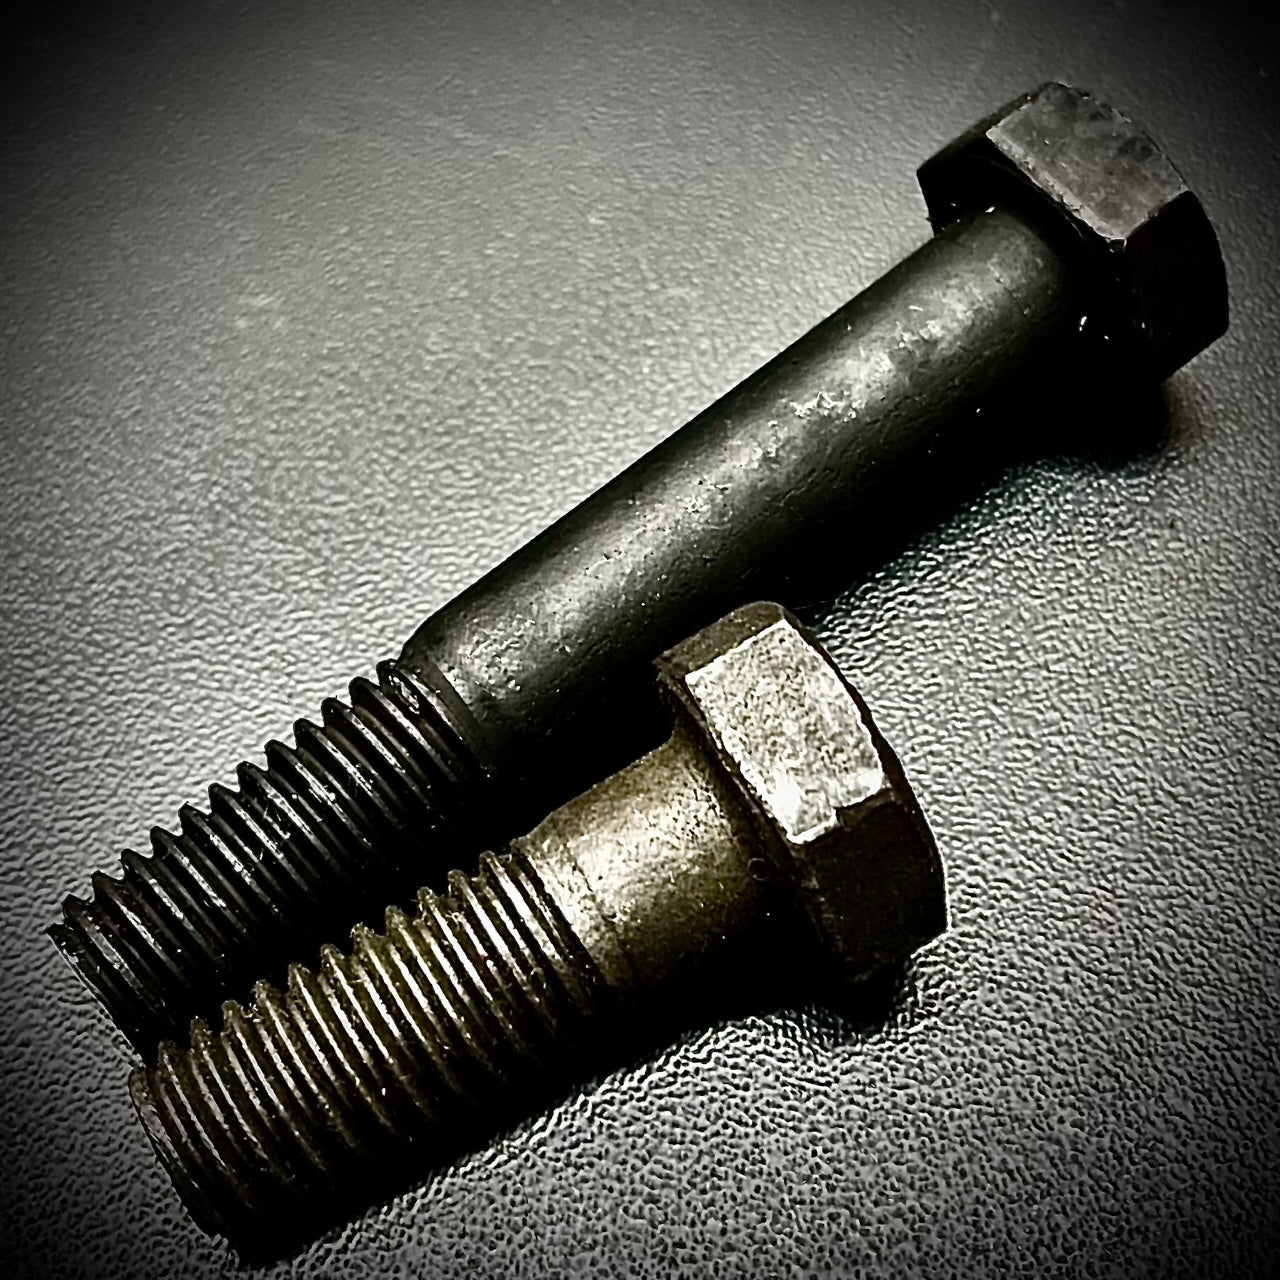 1/2" BSW Whitworth Hex Bolt High Tensile R/ 8.8 Self-Colour DIN933 - Fixaball Ltd. Fixings and Fasteners UK